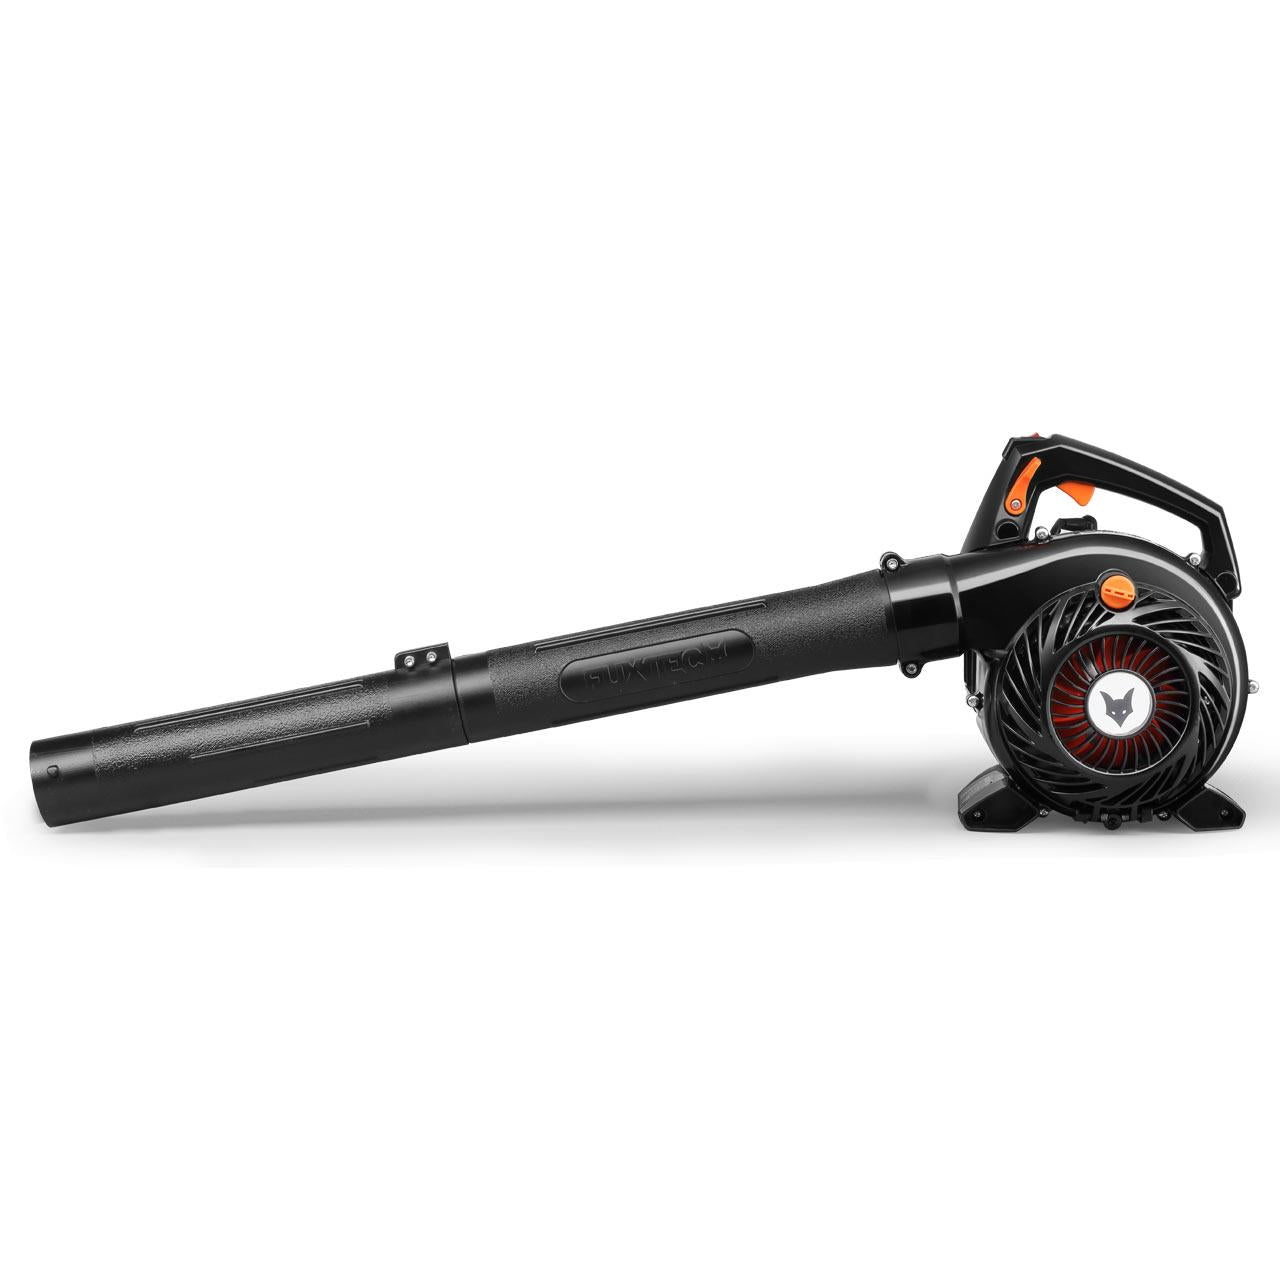 Petrol leaf blower 25.4cc 3in1 blowing-vacuum-shredder-function + collection bag FUXTEC LBS126P